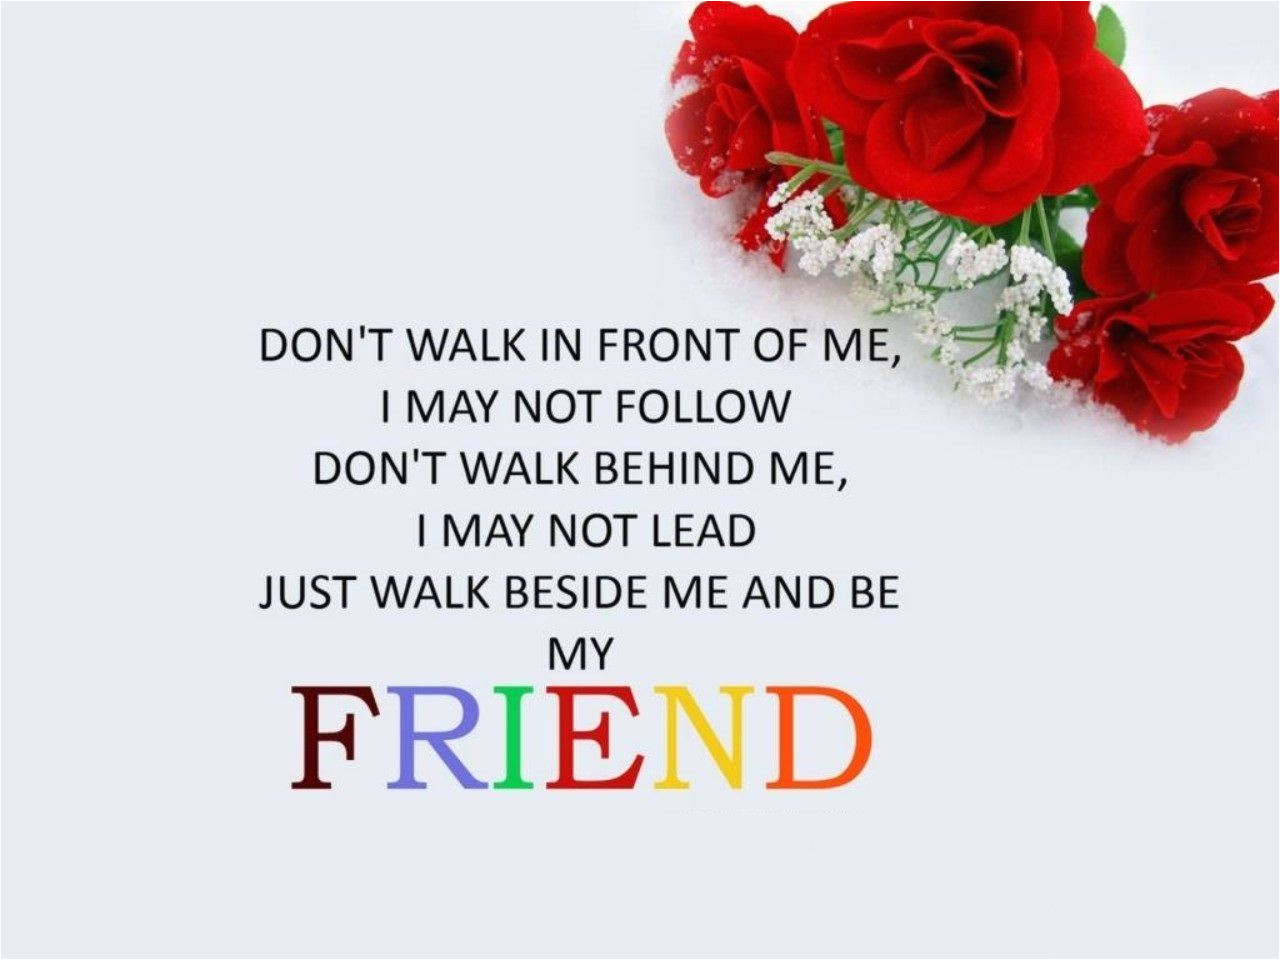 Valentine Card Greetings for Friends Wise Quote Happy Friendship Day Greeting Card Template Red